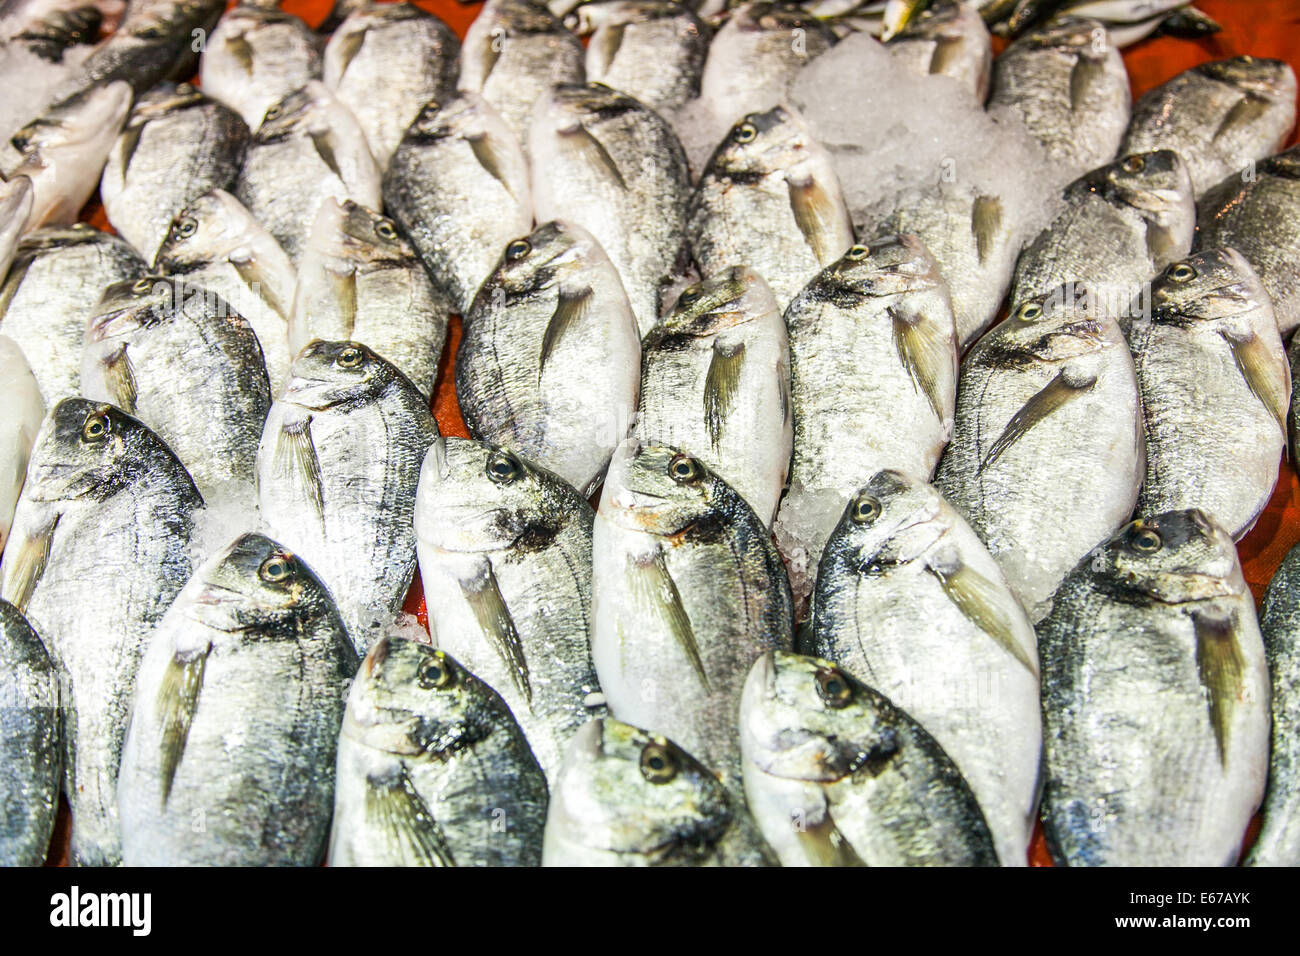 fish on a fish stall at the spice market in Istanbul Stock Photo